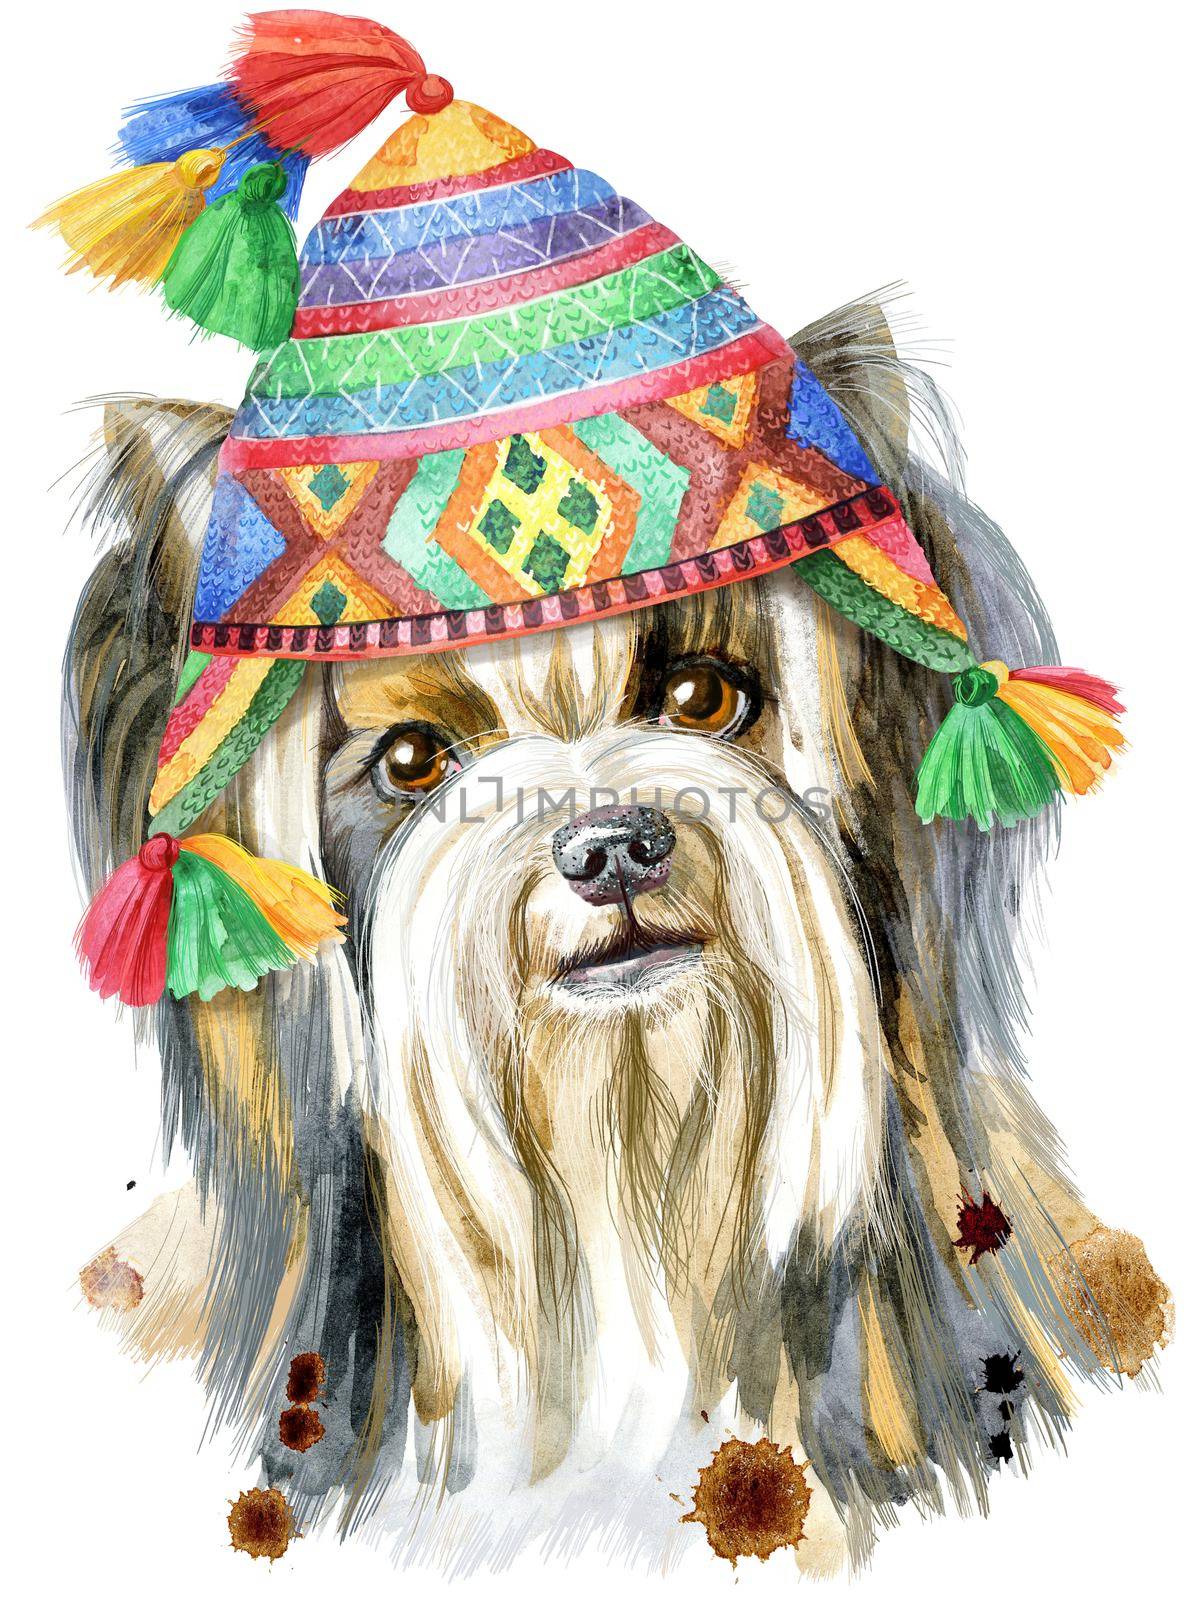 Dog, yorkie in chullo hat on white background. Hand drawn sweet pet illustration. Symbol of the year 2018